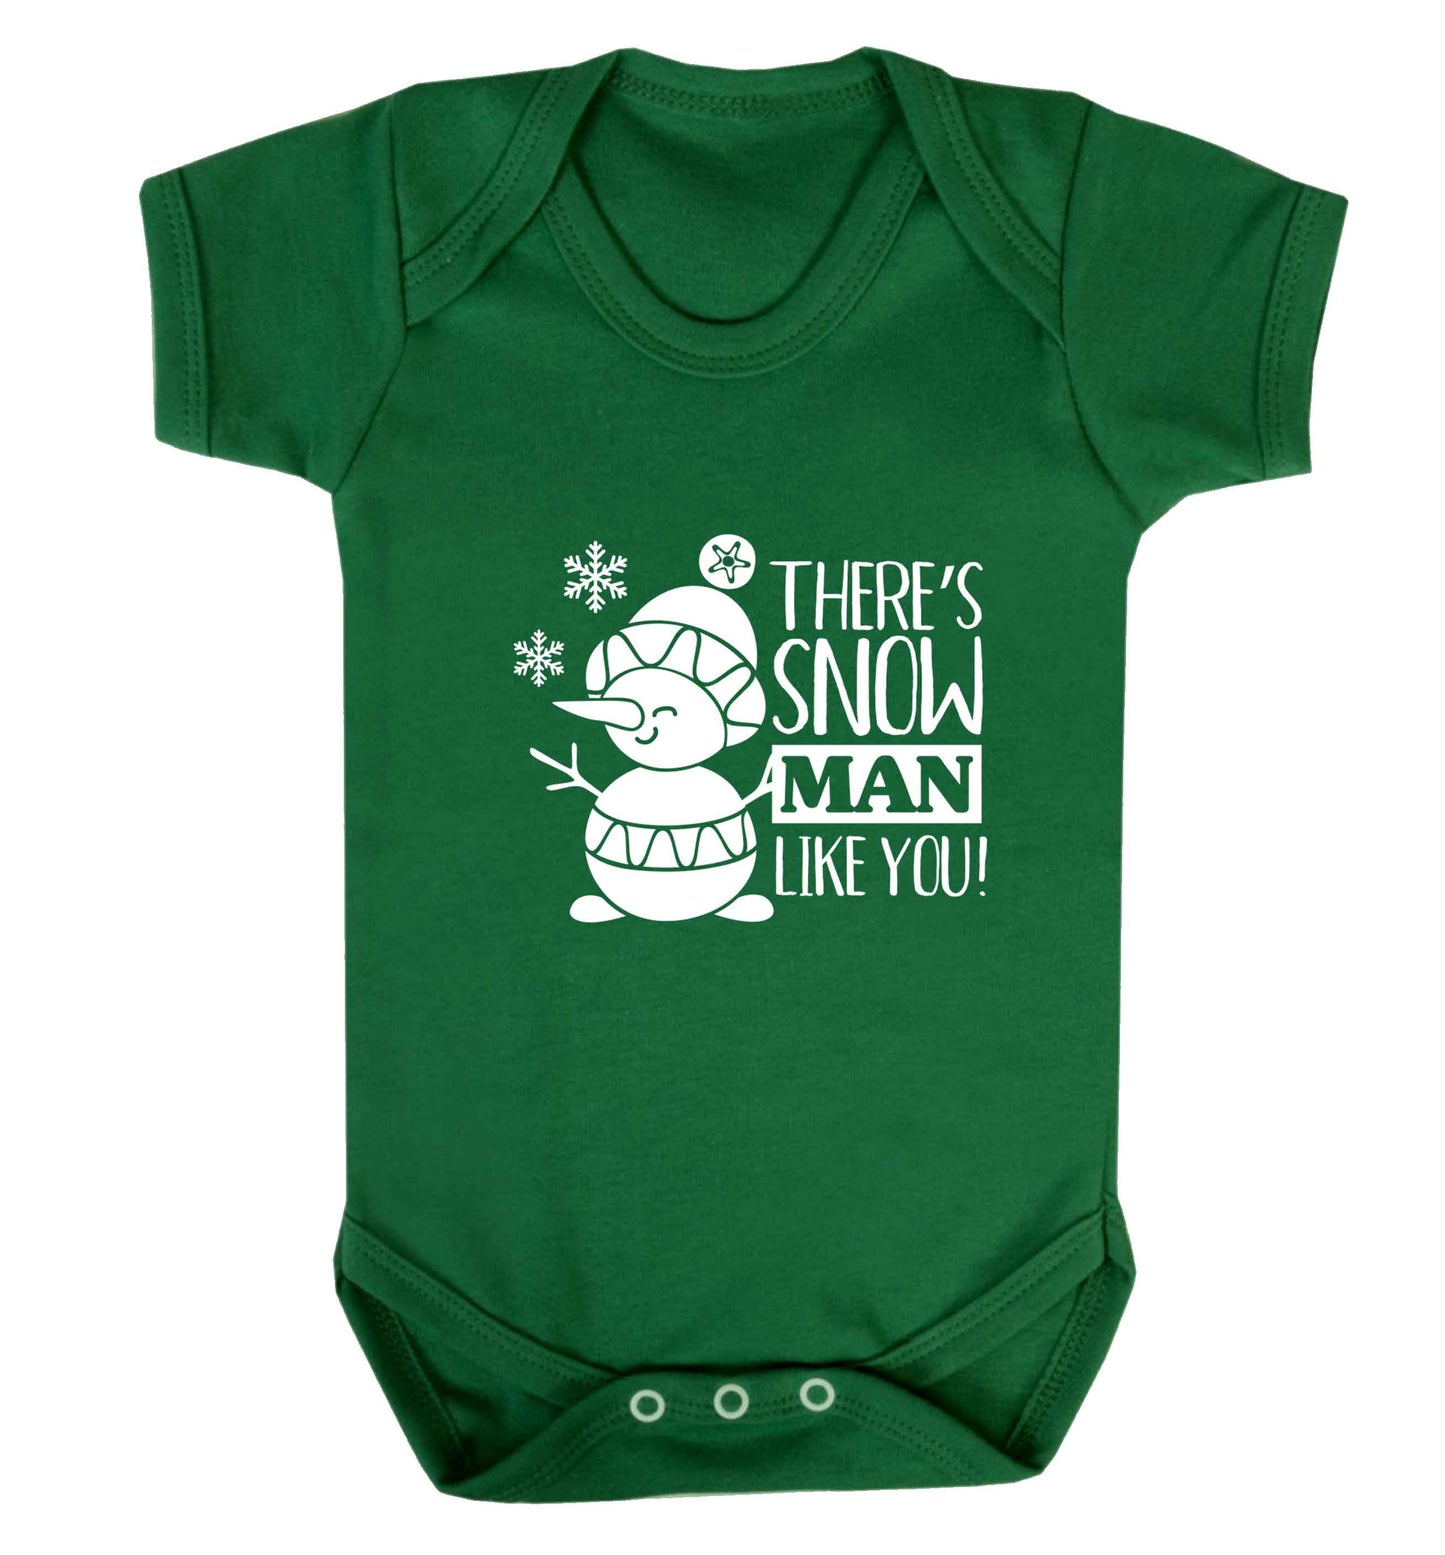 There's snow man like you baby vest green 18-24 months